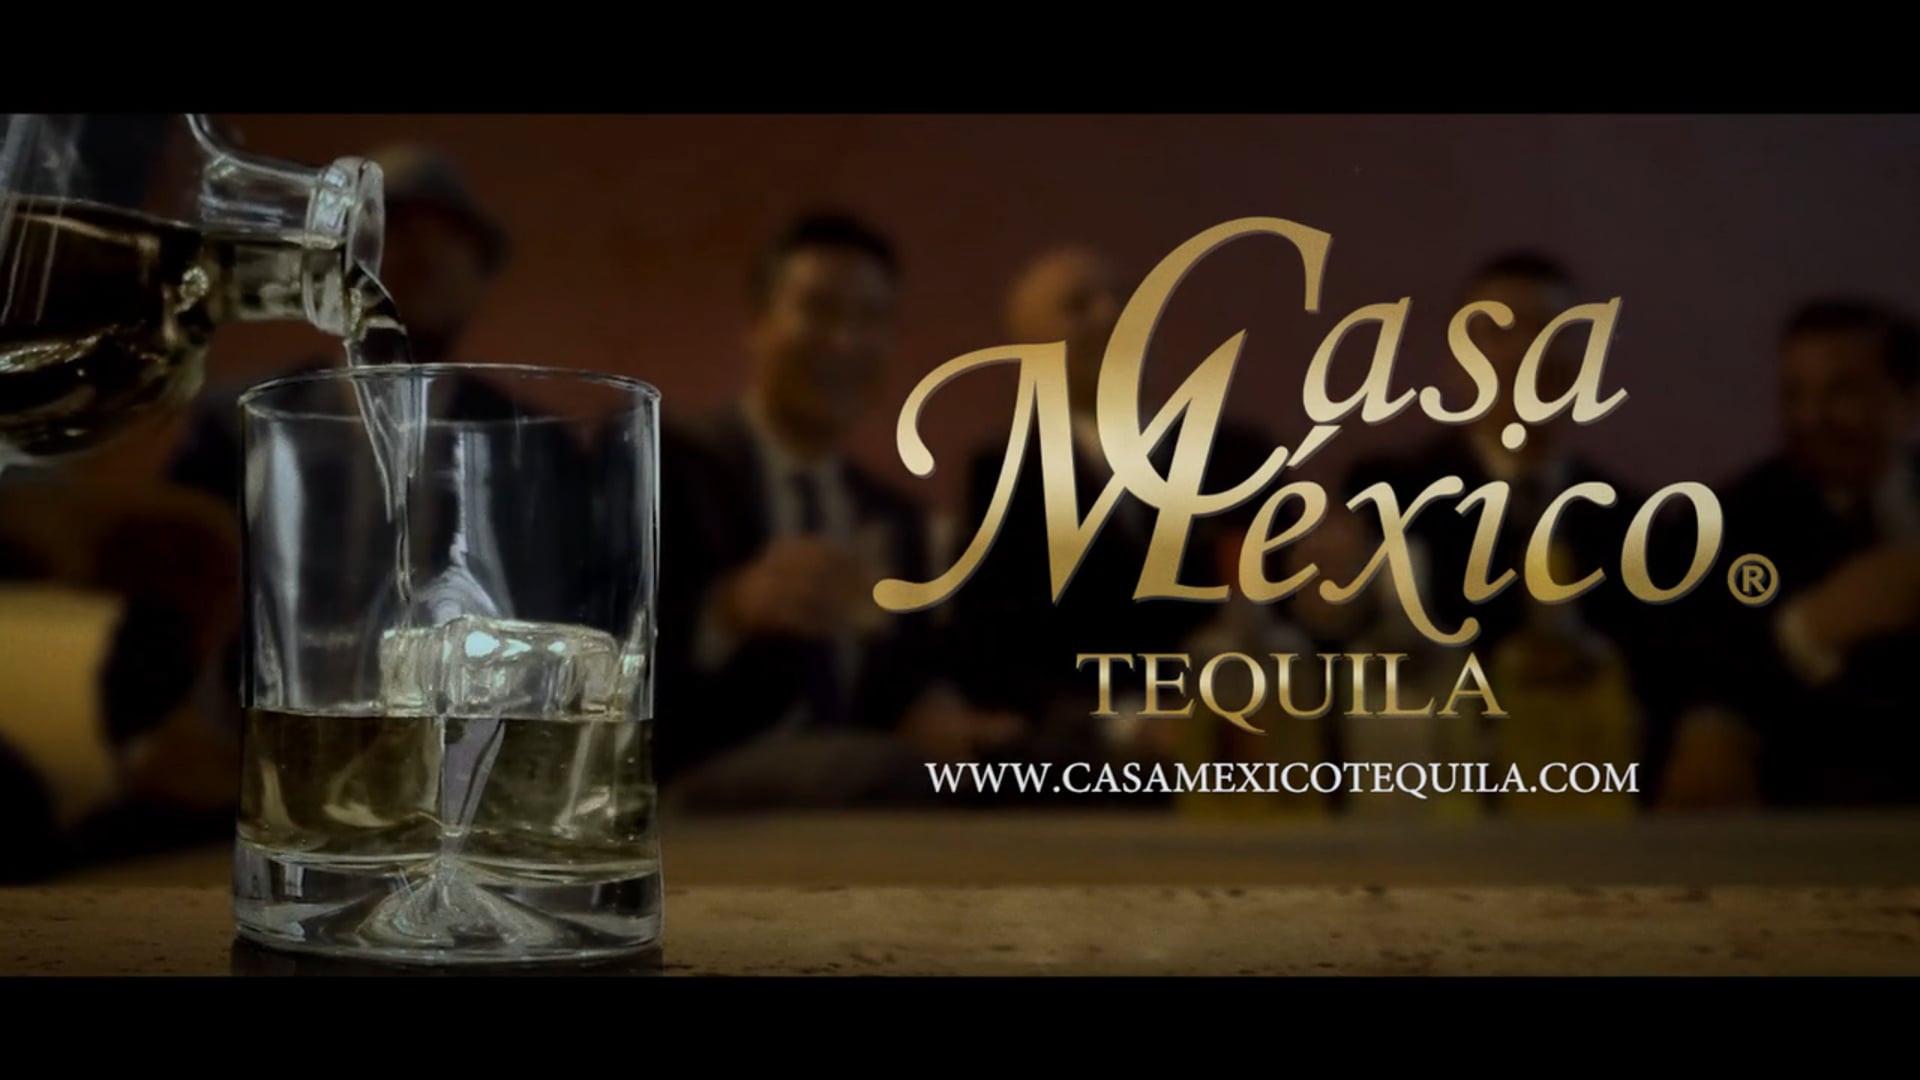 Casa Mexico Tequila / Good Times